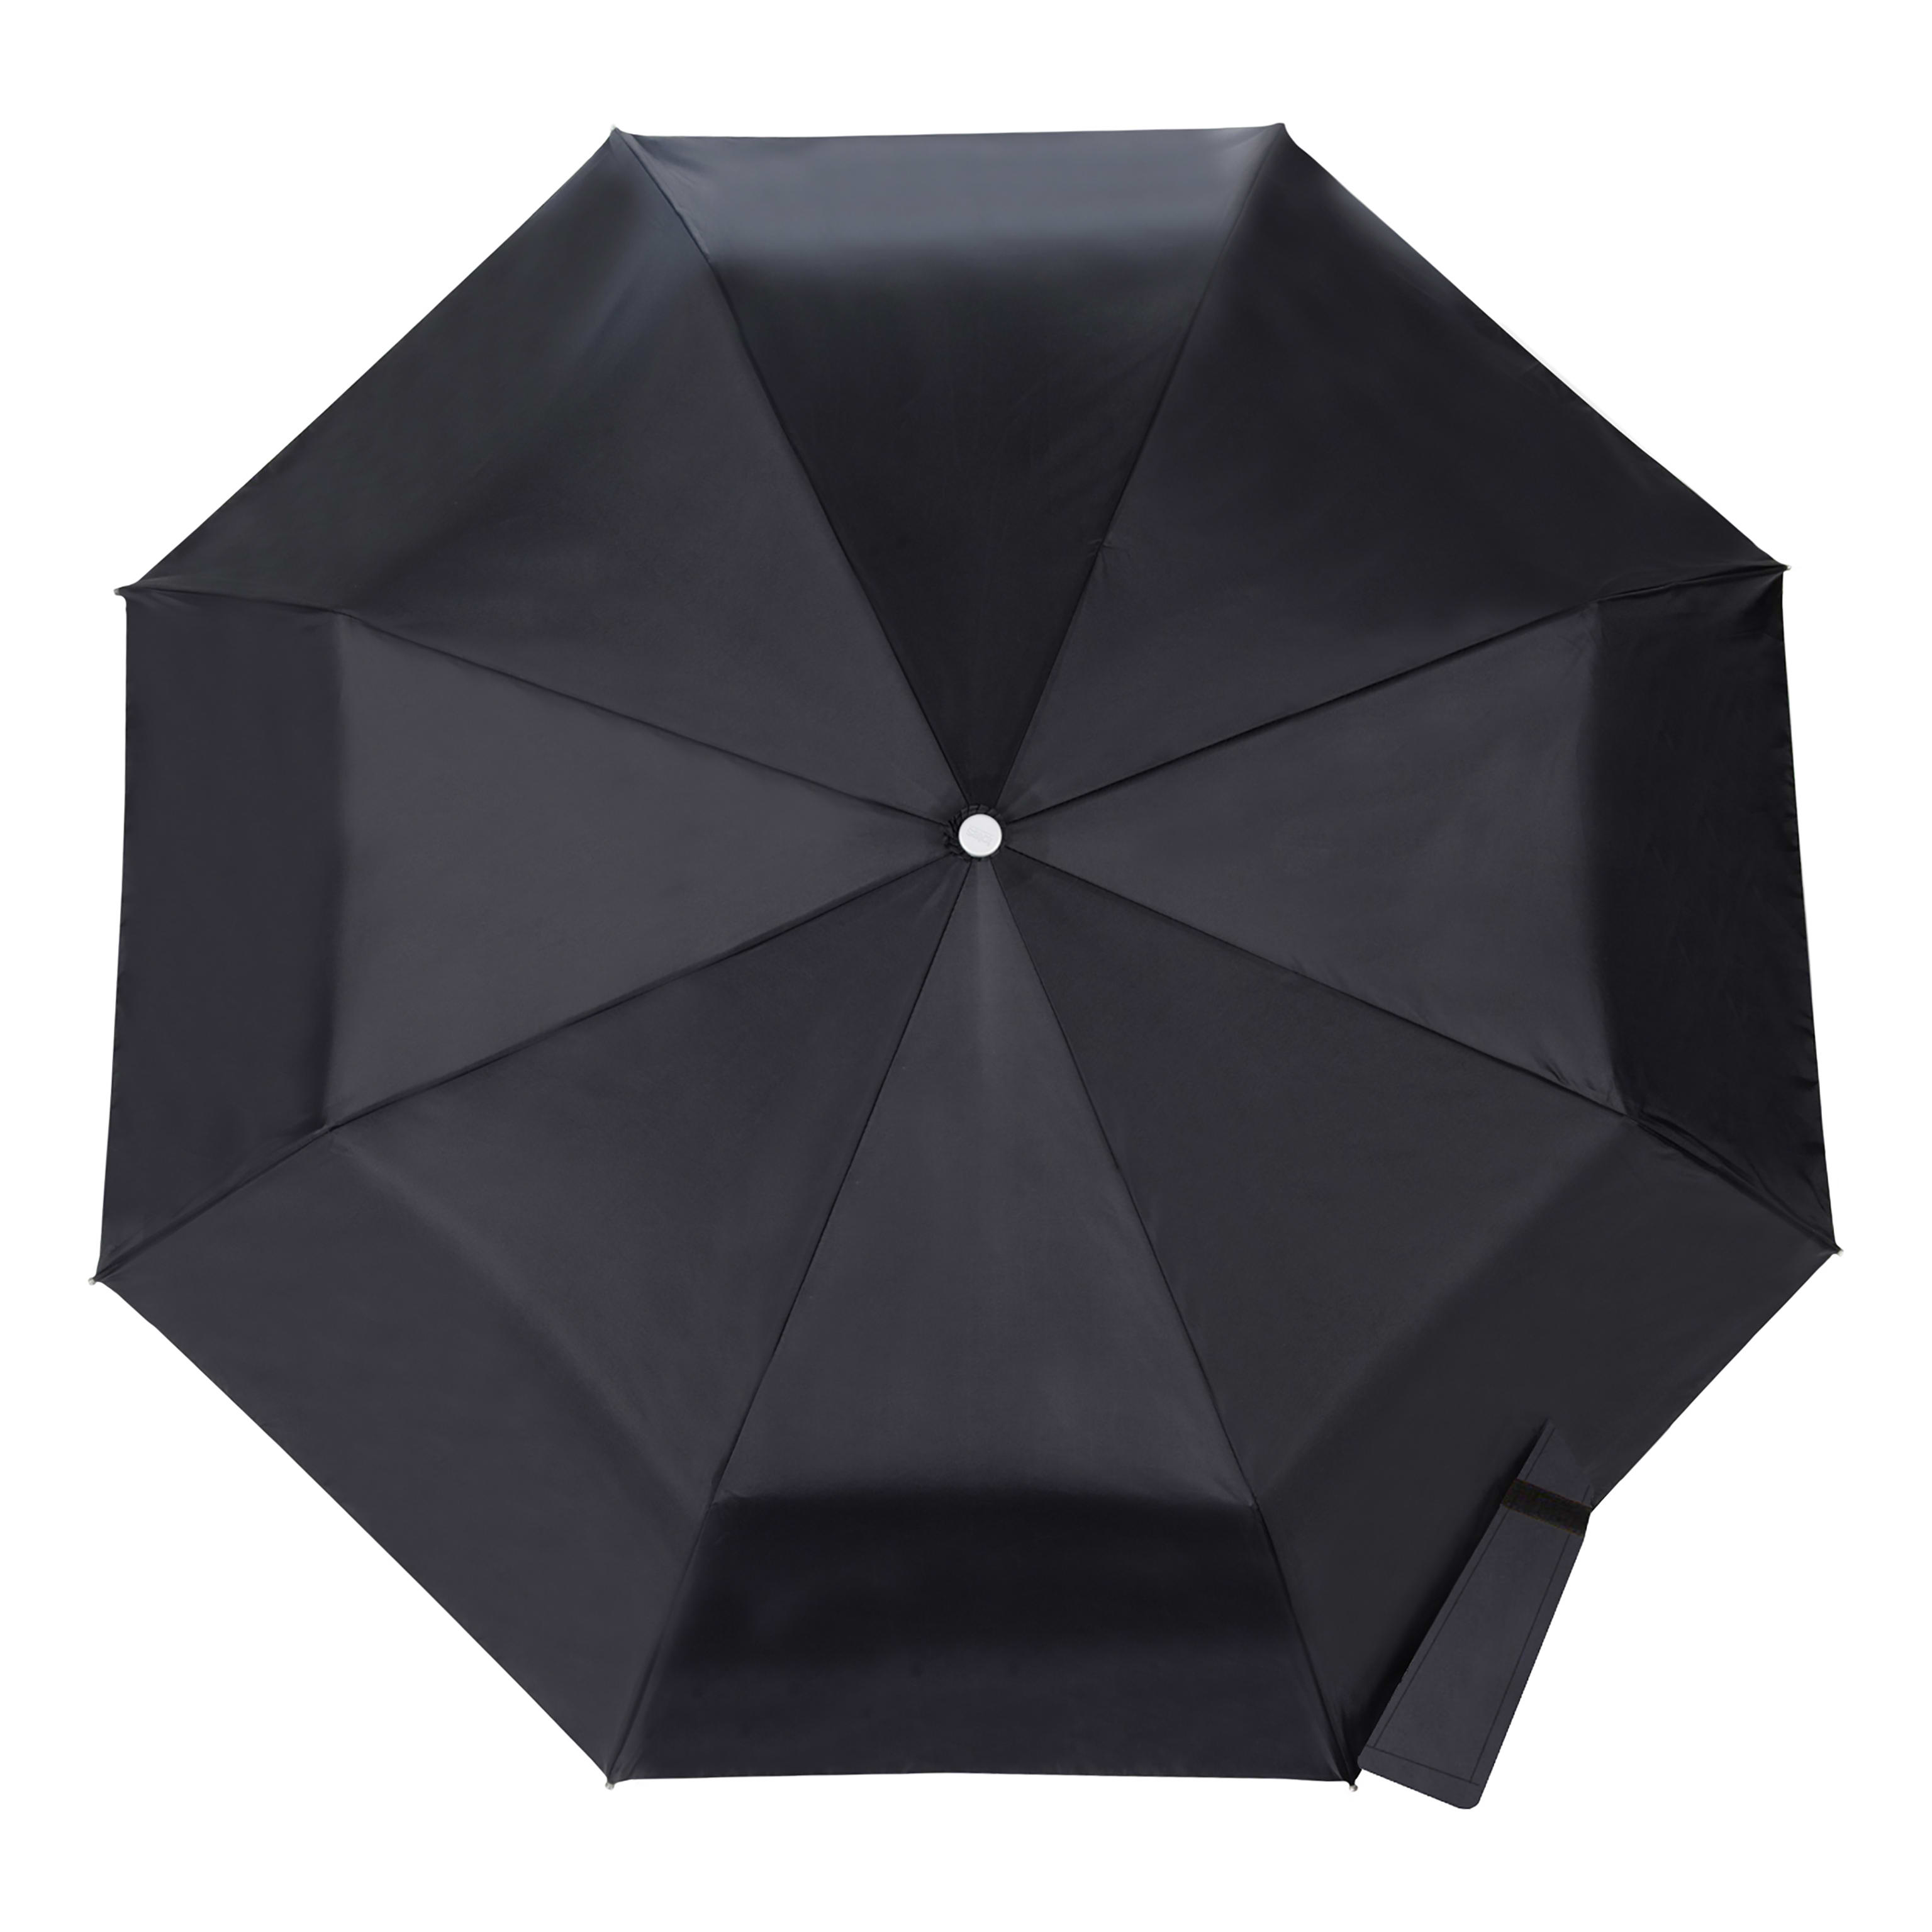 Totes® Automatic Open Compact Umbrella with Totescoat®